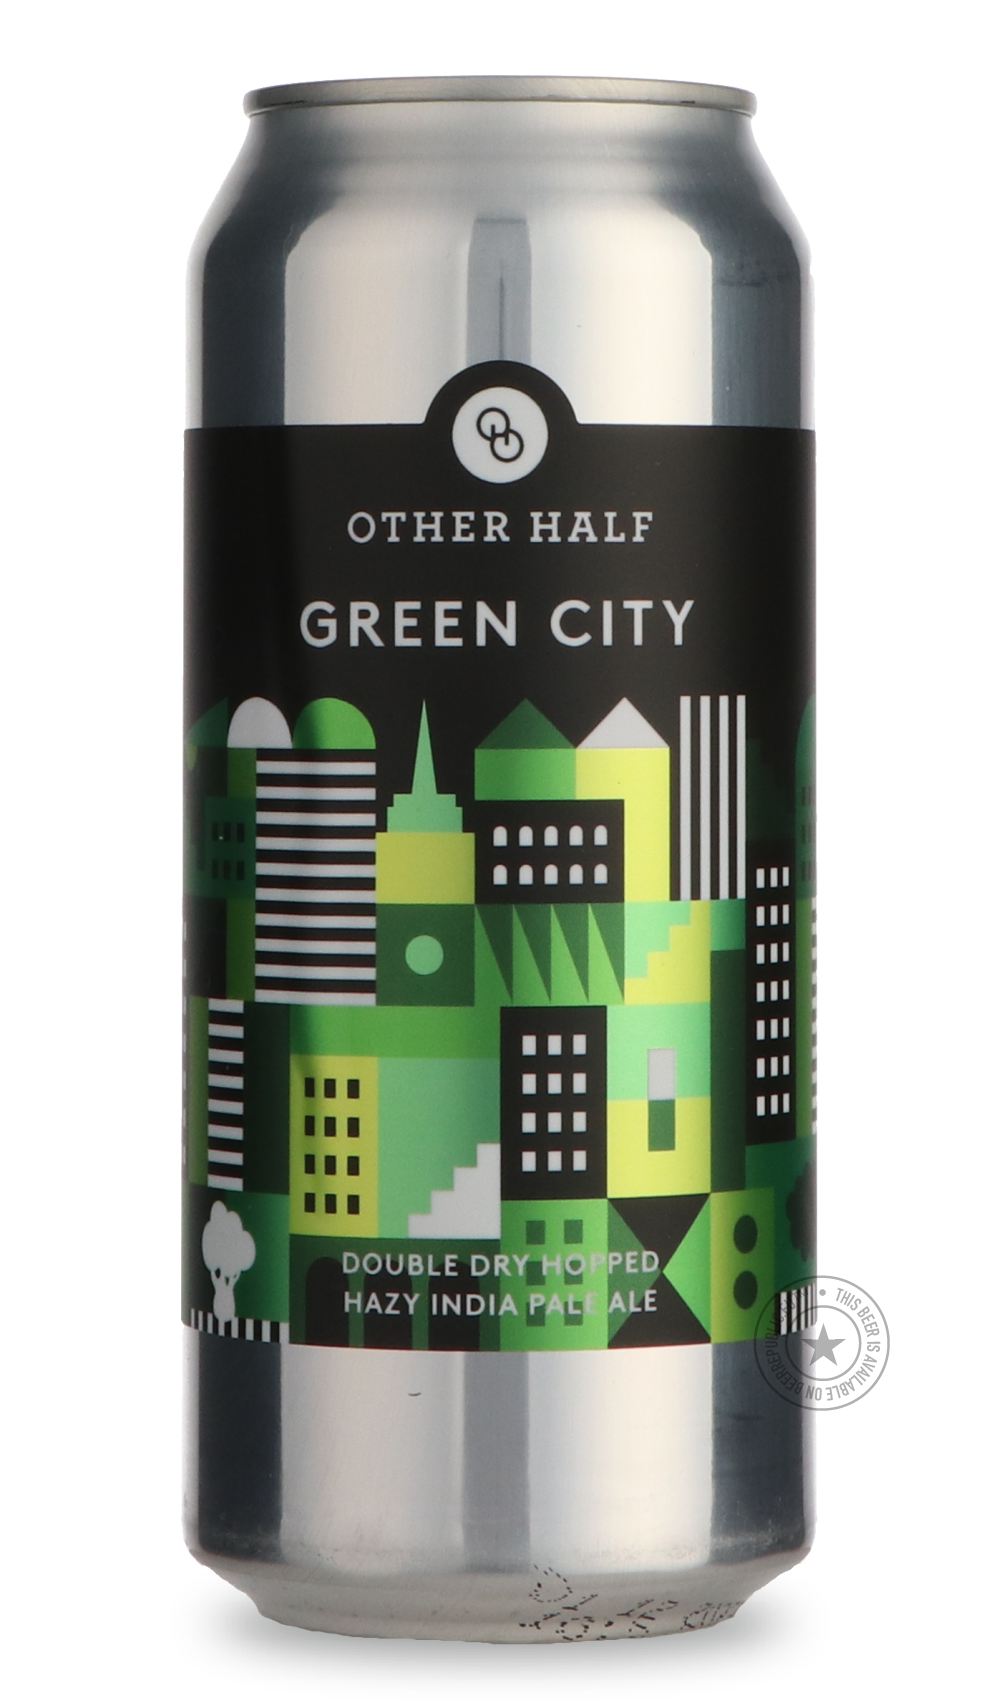 -Other Half- DDH Green City-IPA- Only @ Beer Republic - The best online beer store for American & Canadian craft beer - Buy beer online from the USA and Canada - Bier online kopen - Amerikaans bier kopen - Craft beer store - Craft beer kopen - Amerikanisch bier kaufen - Bier online kaufen - Acheter biere online - IPA - Stout - Porter - New England IPA - Hazy IPA - Imperial Stout - Barrel Aged - Barrel Aged Imperial Stout - Brown - Dark beer - Blond - Blonde - Pilsner - Lager - Wheat - Weizen - Amber - Barle